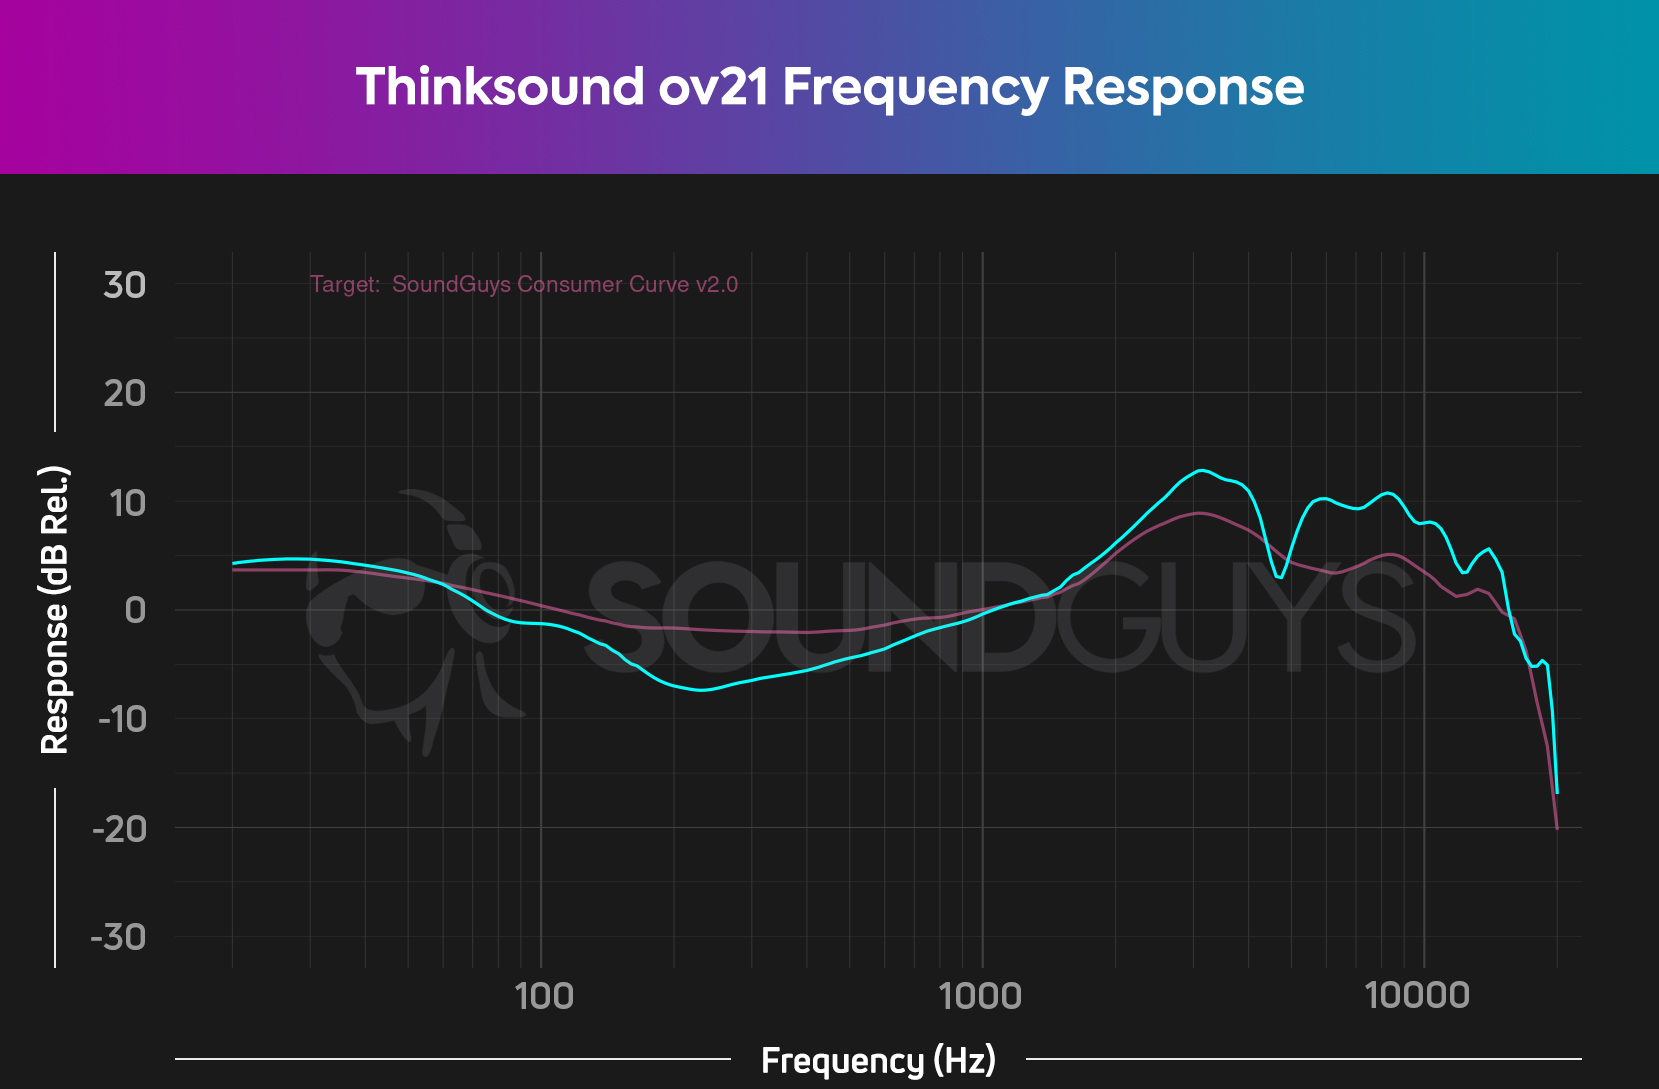 Frequency response of the Thinksound ov21 shows the exaggerated highs.